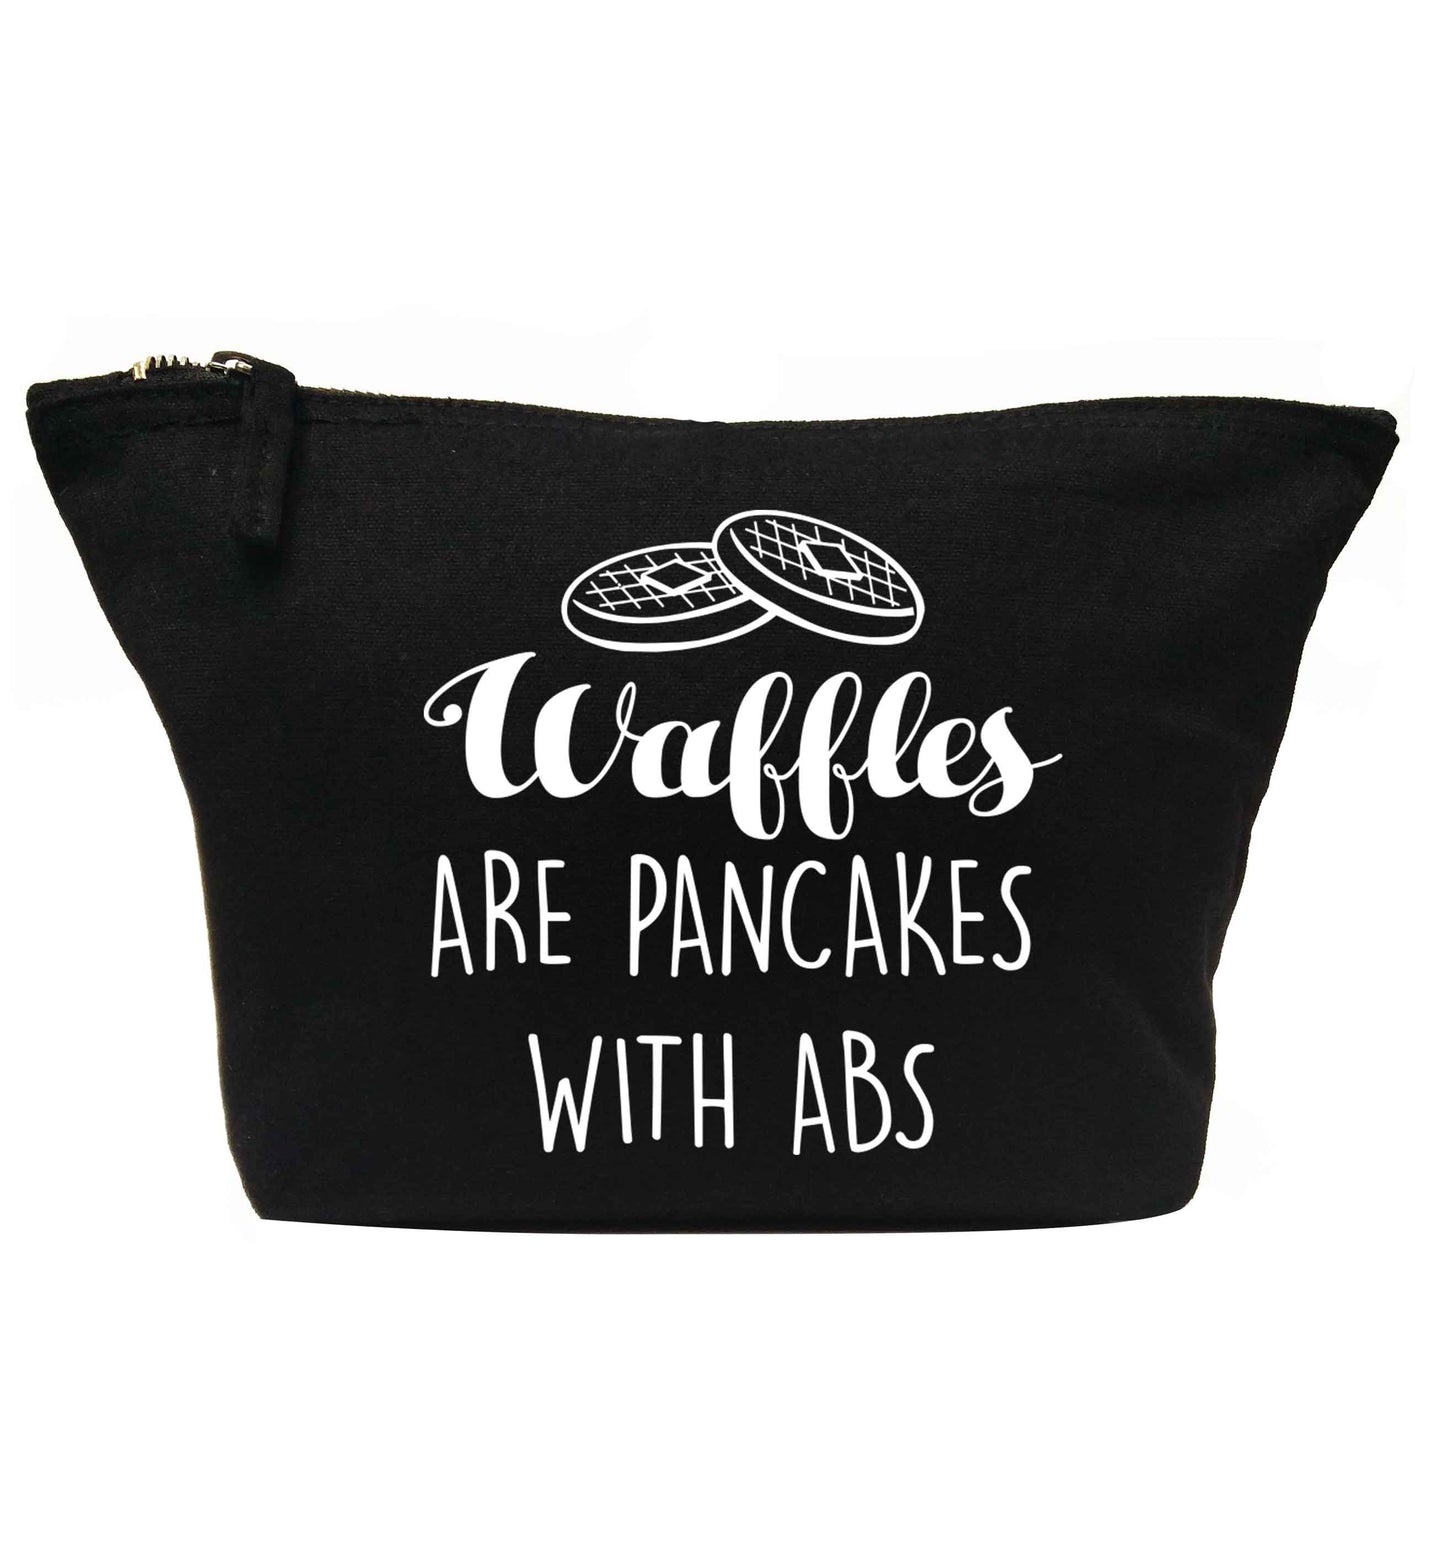 Waffles are just pancakes with abs | Makeup / wash bag